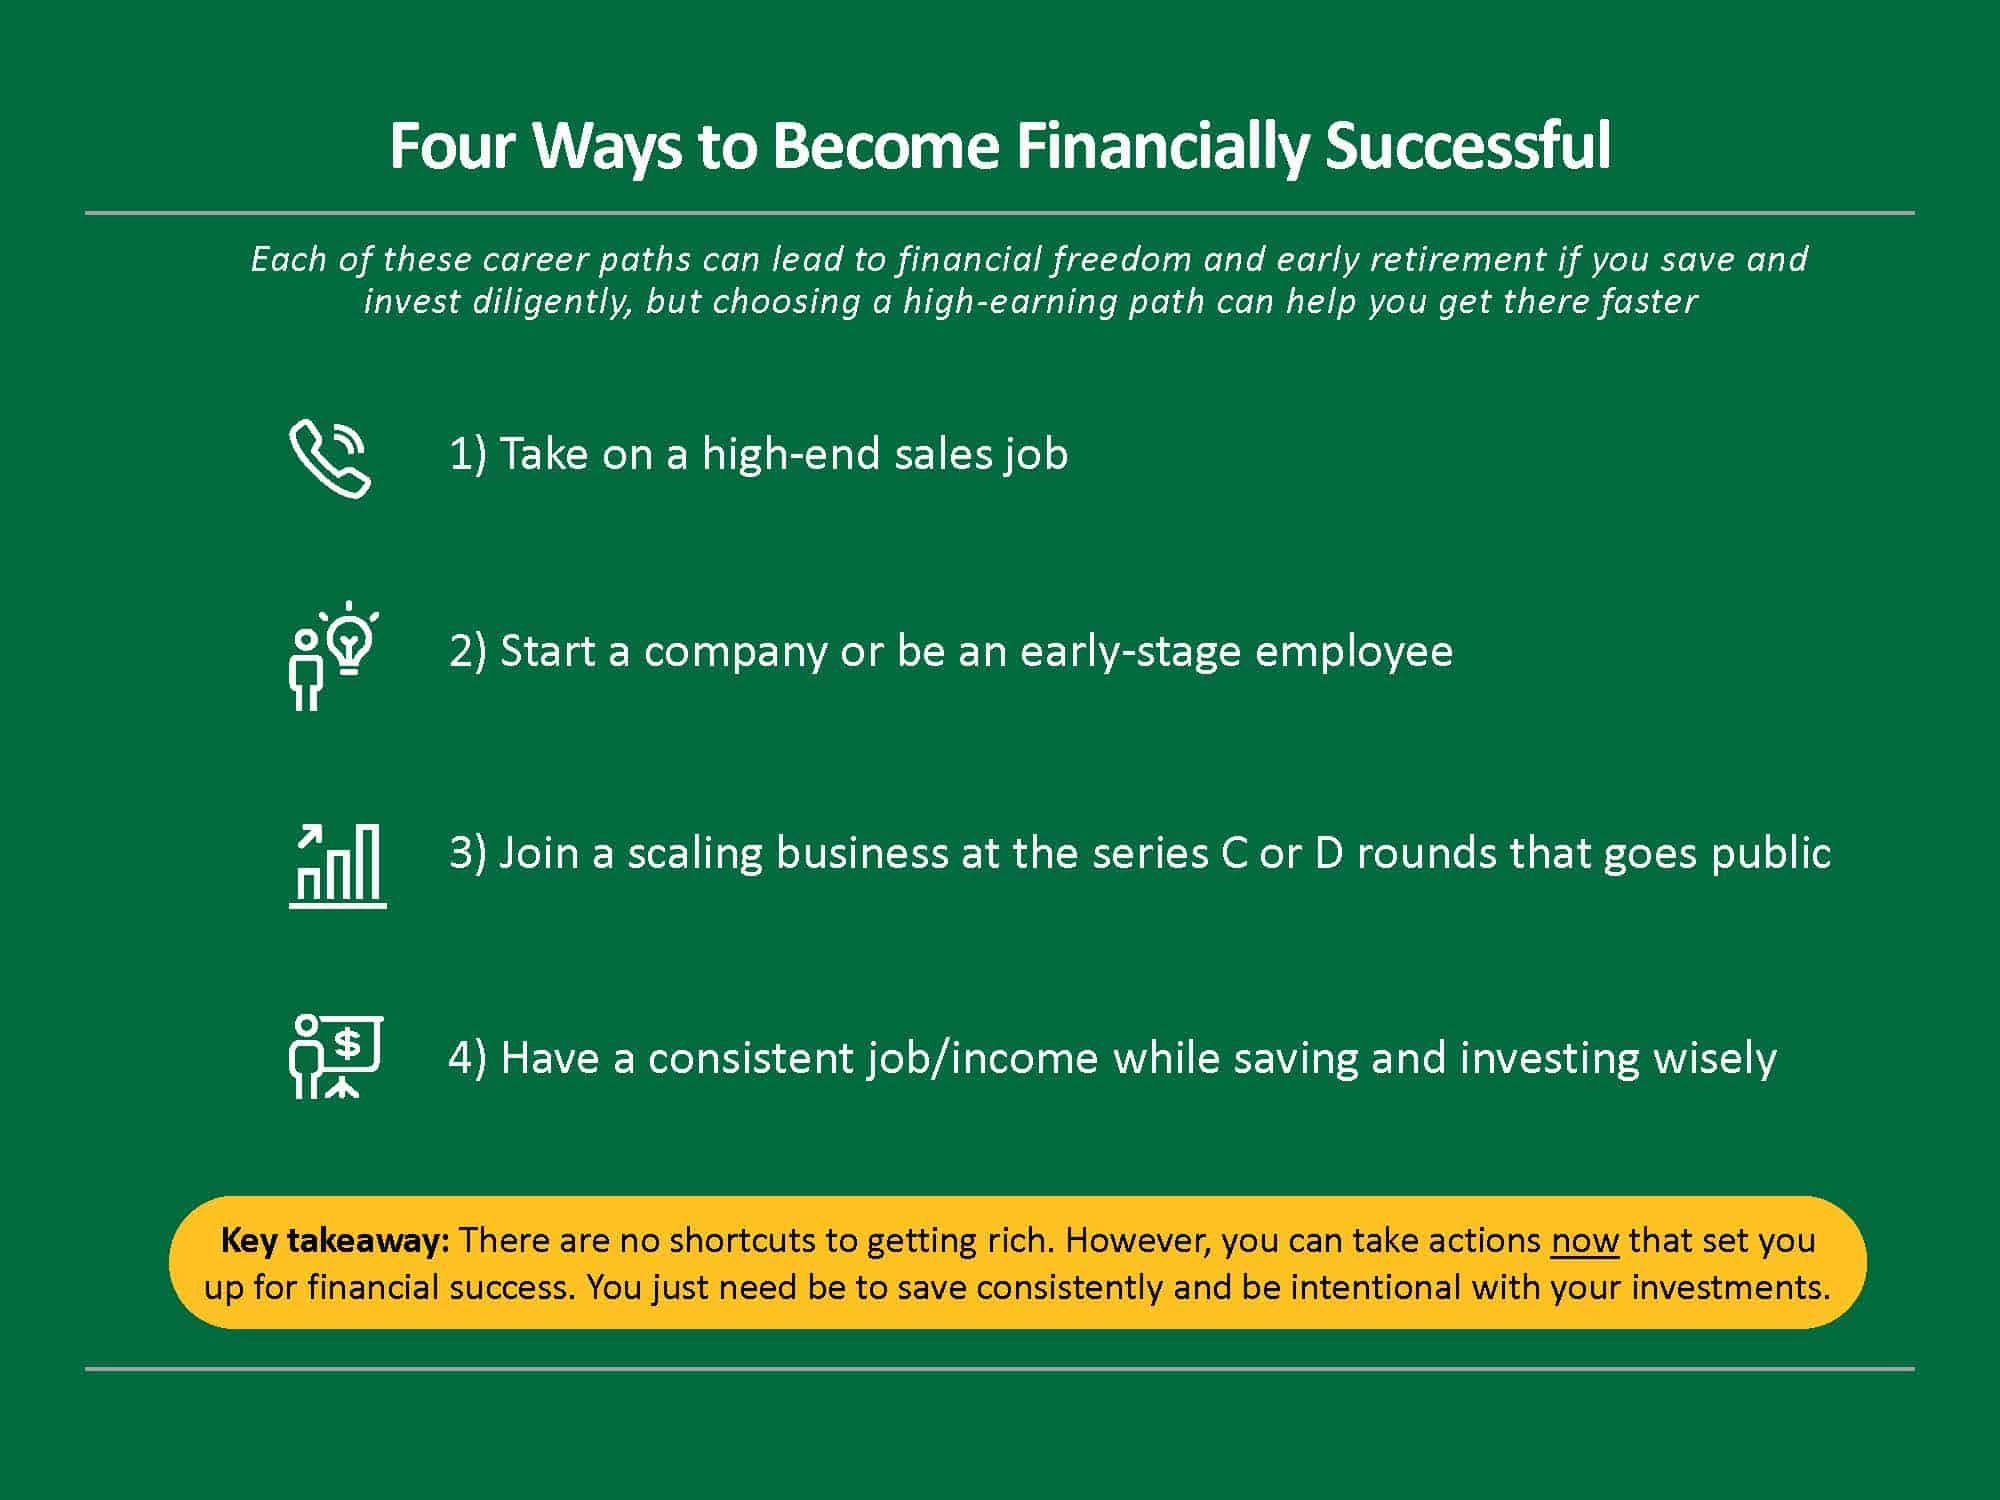 Four Ways to Become Financially Successful in 2022